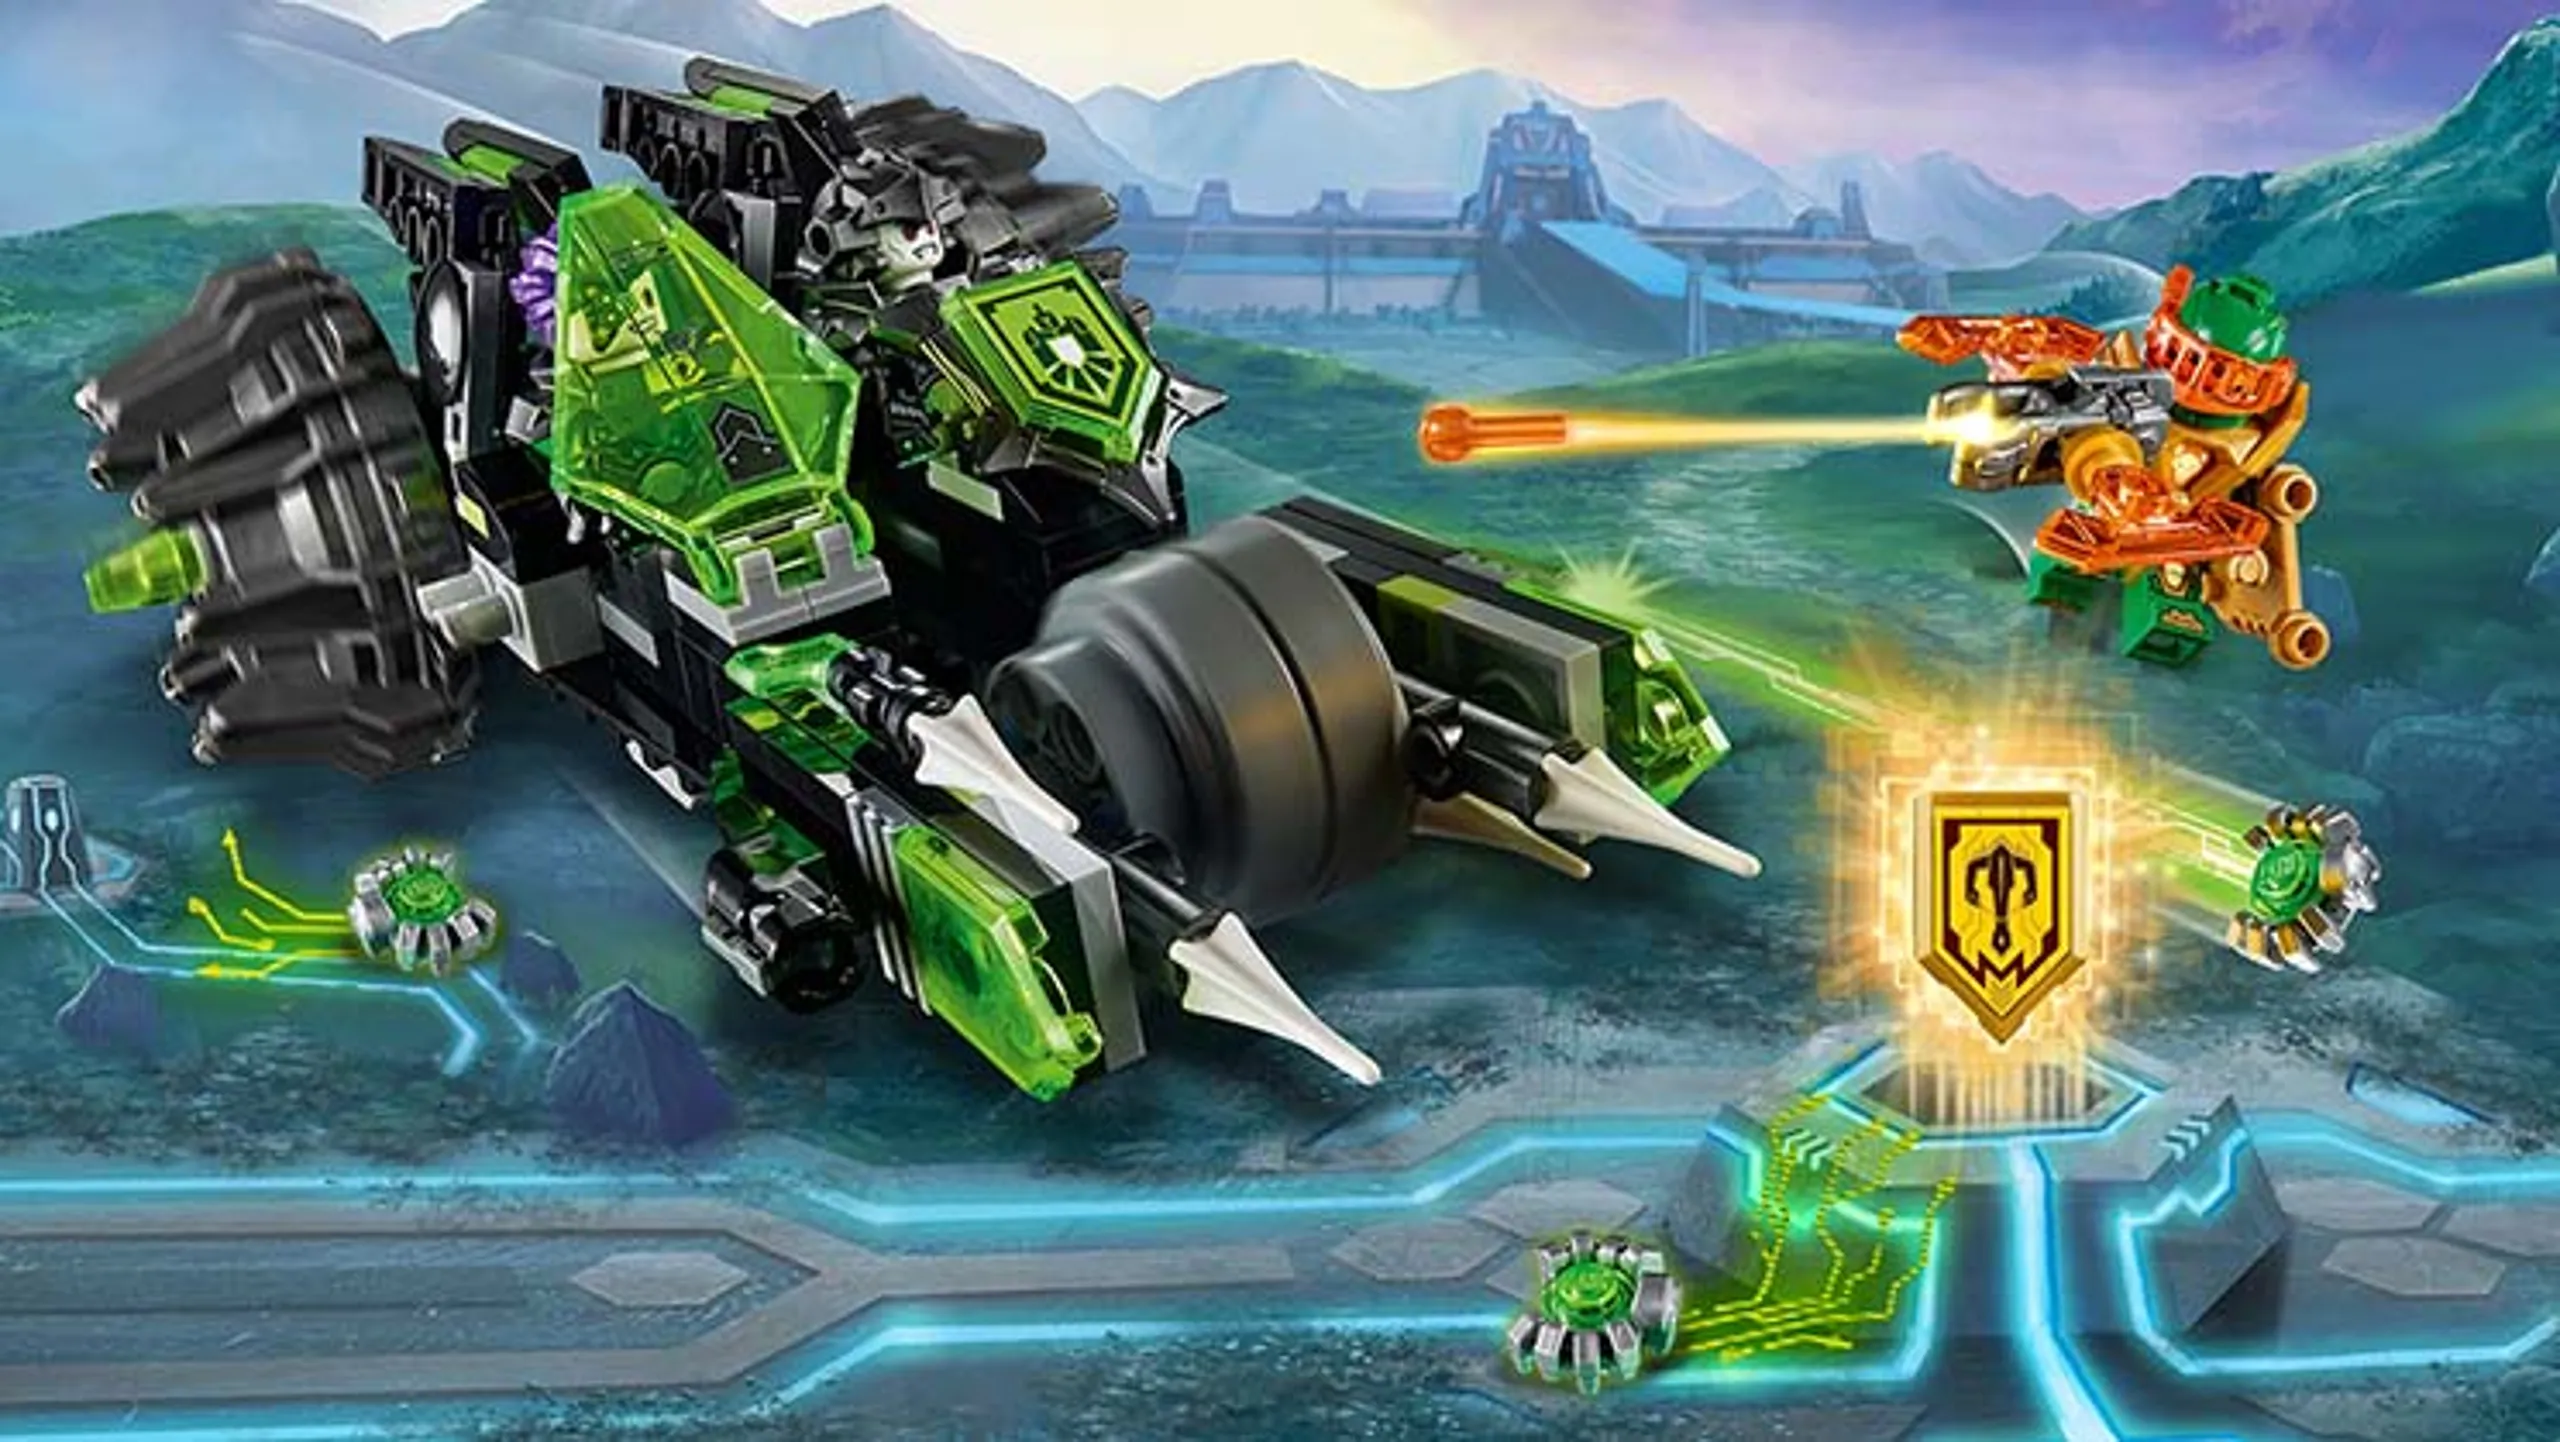 LEGO® NEXO KNIGHTS™ Twinfector – 72002 – Help Aaron battle the evil twins! Fire the crossbow and destroy their Twinfector before they separate it into 2 flyers. Includes 2 scannable shields for the NEXO Powers 